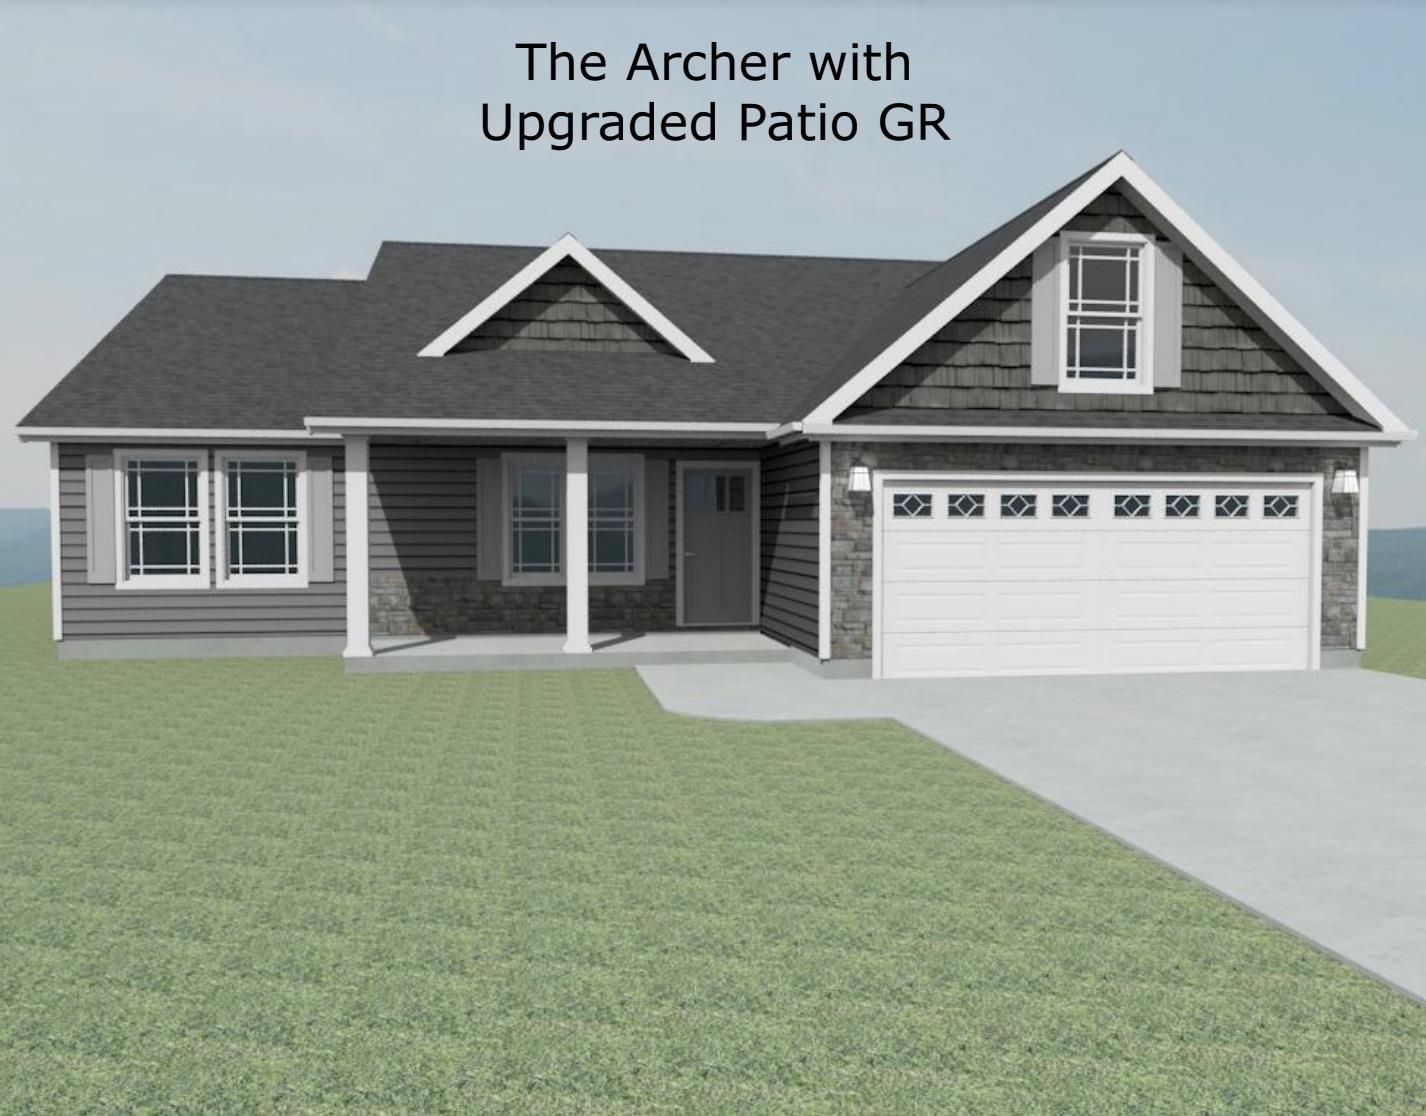 The ARCHER plan features an open living area with a spacious living room. Large kitchen area with a pantry. Split bedroom plan. The master features walk-in closets and a full bathroom. Out back is a large covered patio overlooking the huge backyard. Other lots and floorplans available, call today! Preferred Lender/Attorney Closing Costs Incentive Offered! Lot 24.